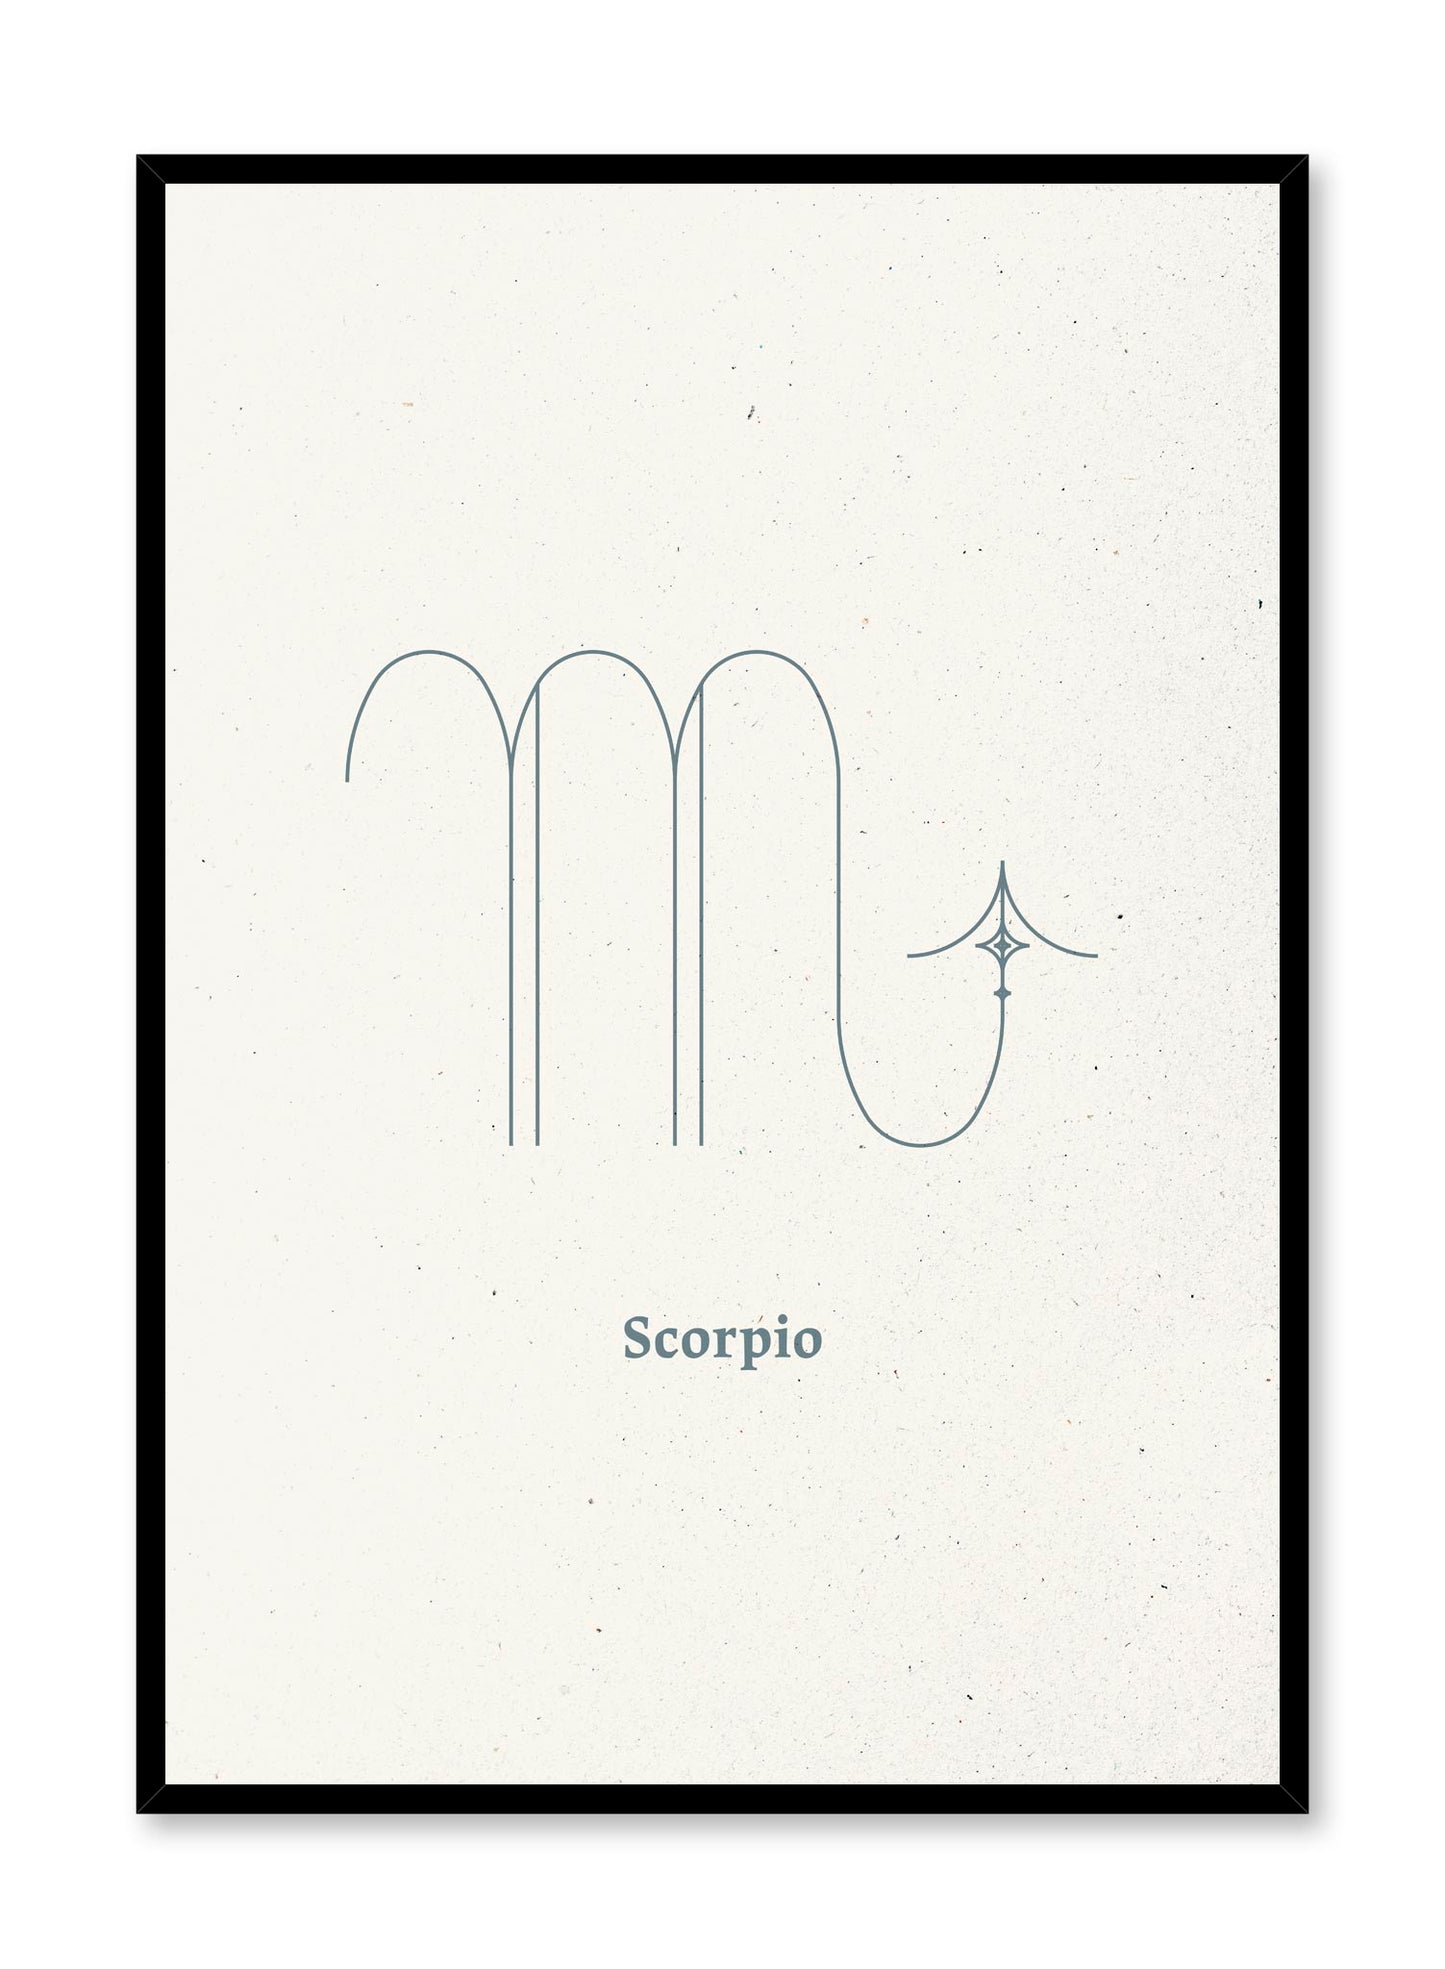 Minimalist celestial illustration poster by Opposite Wall with Scorpio symbol